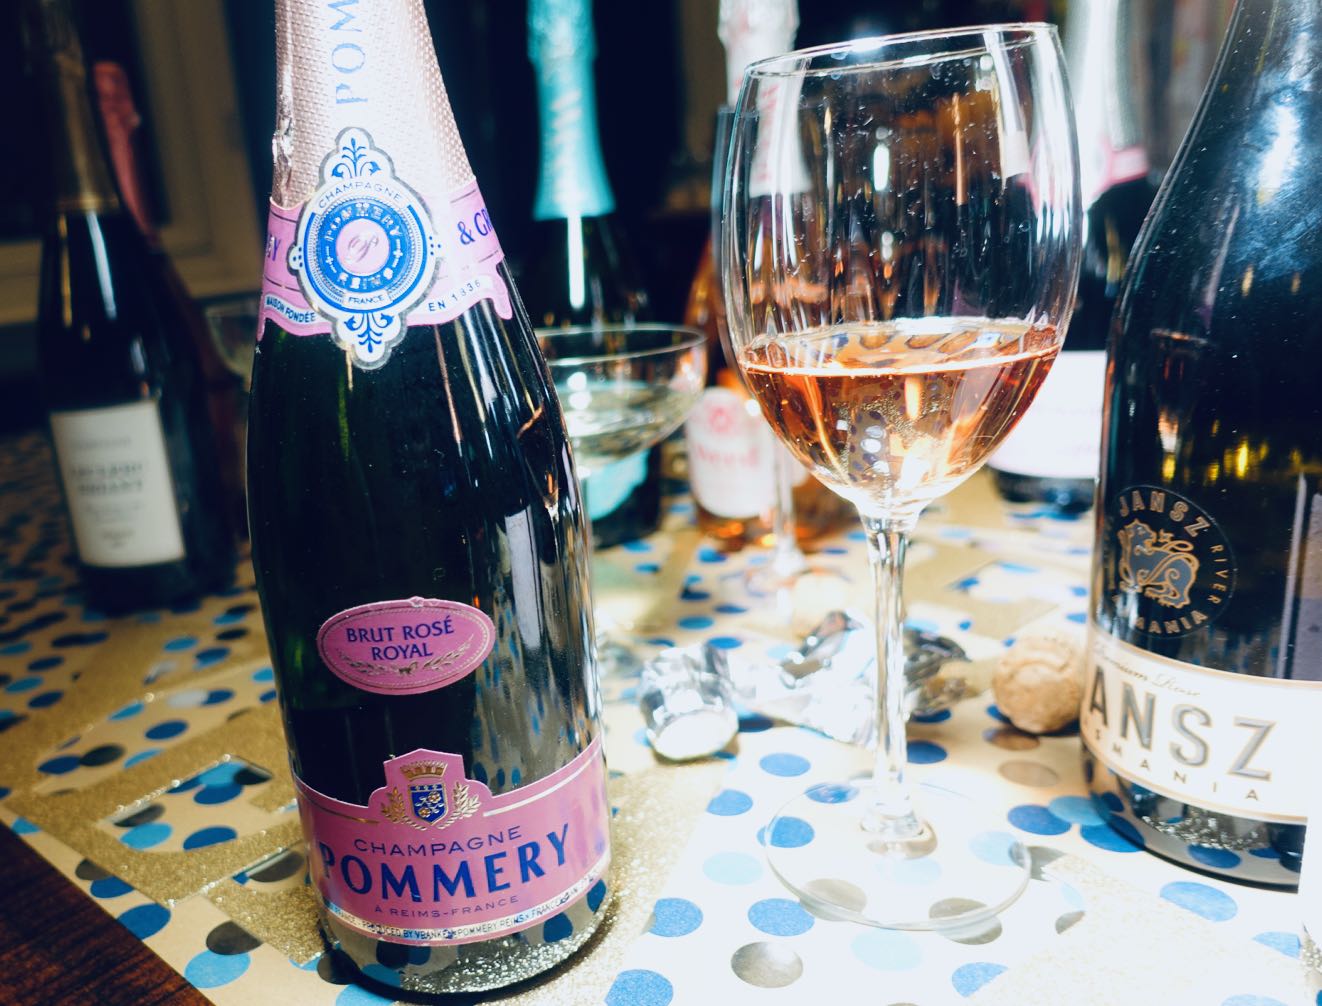 Louis Pommery Brut Rose Is The Best Bubbly for NYE